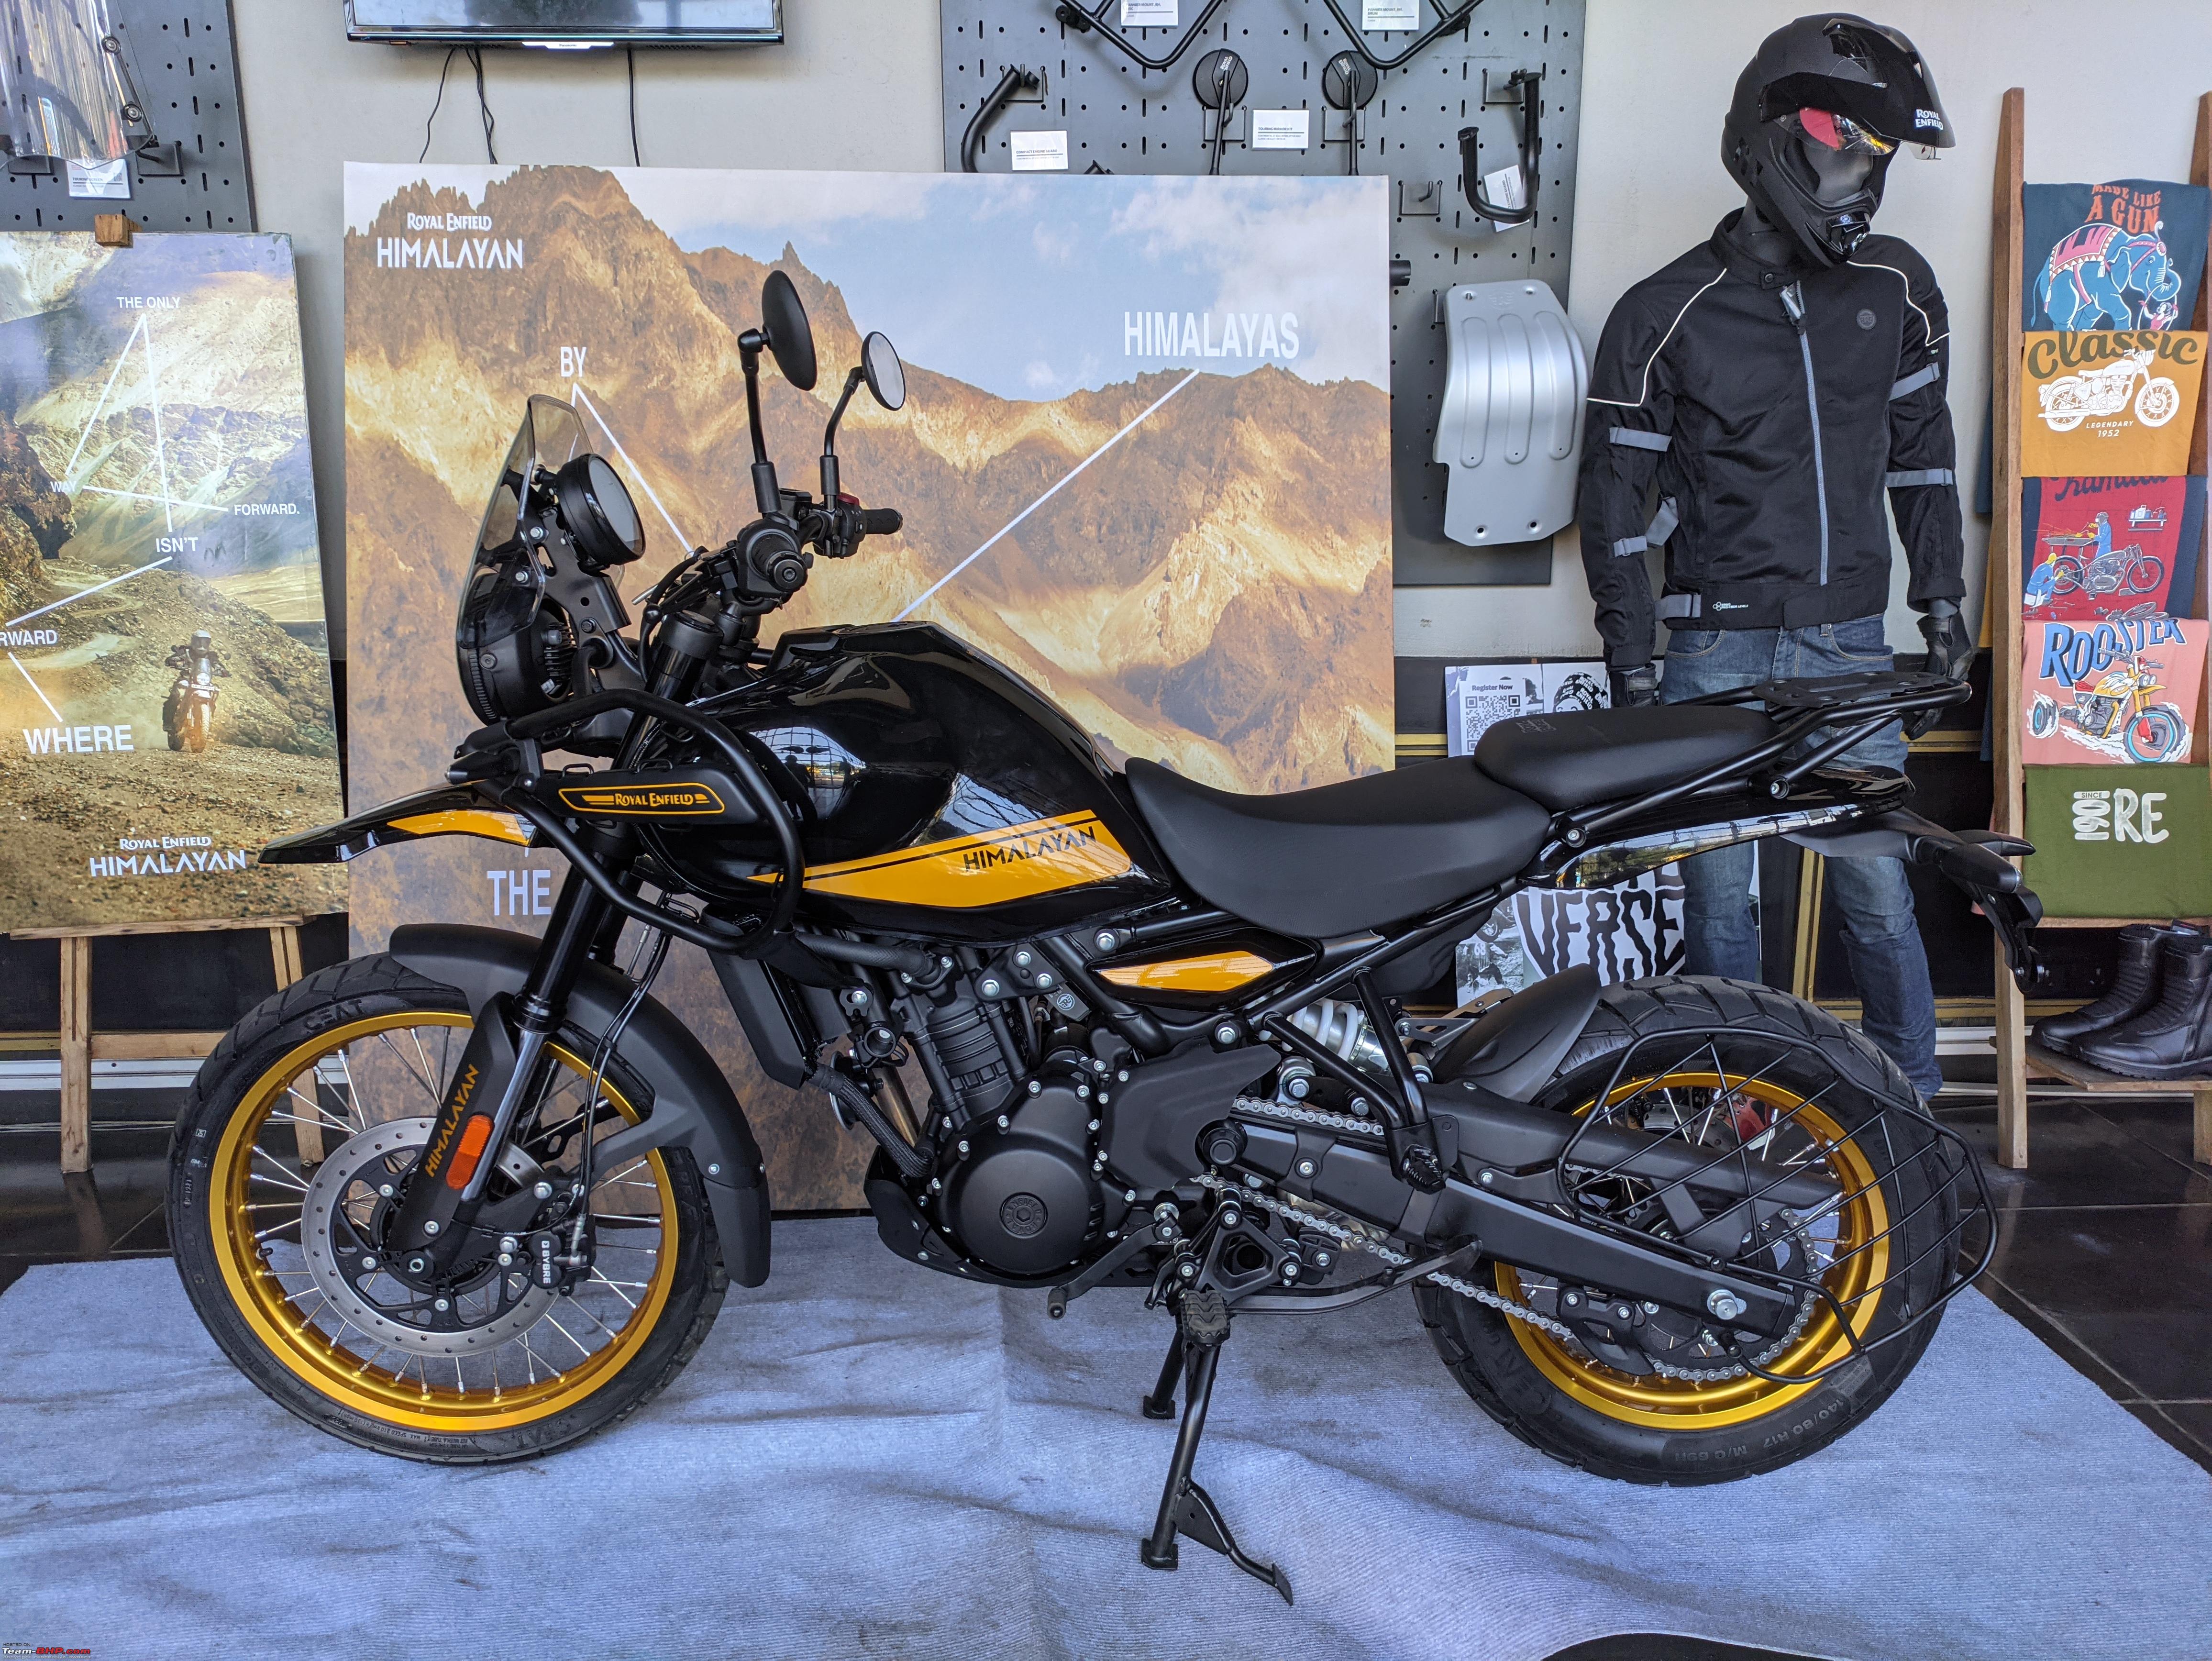 Royal Enfield Himalayan 450 Price Revealed: Royal Enfield All-New